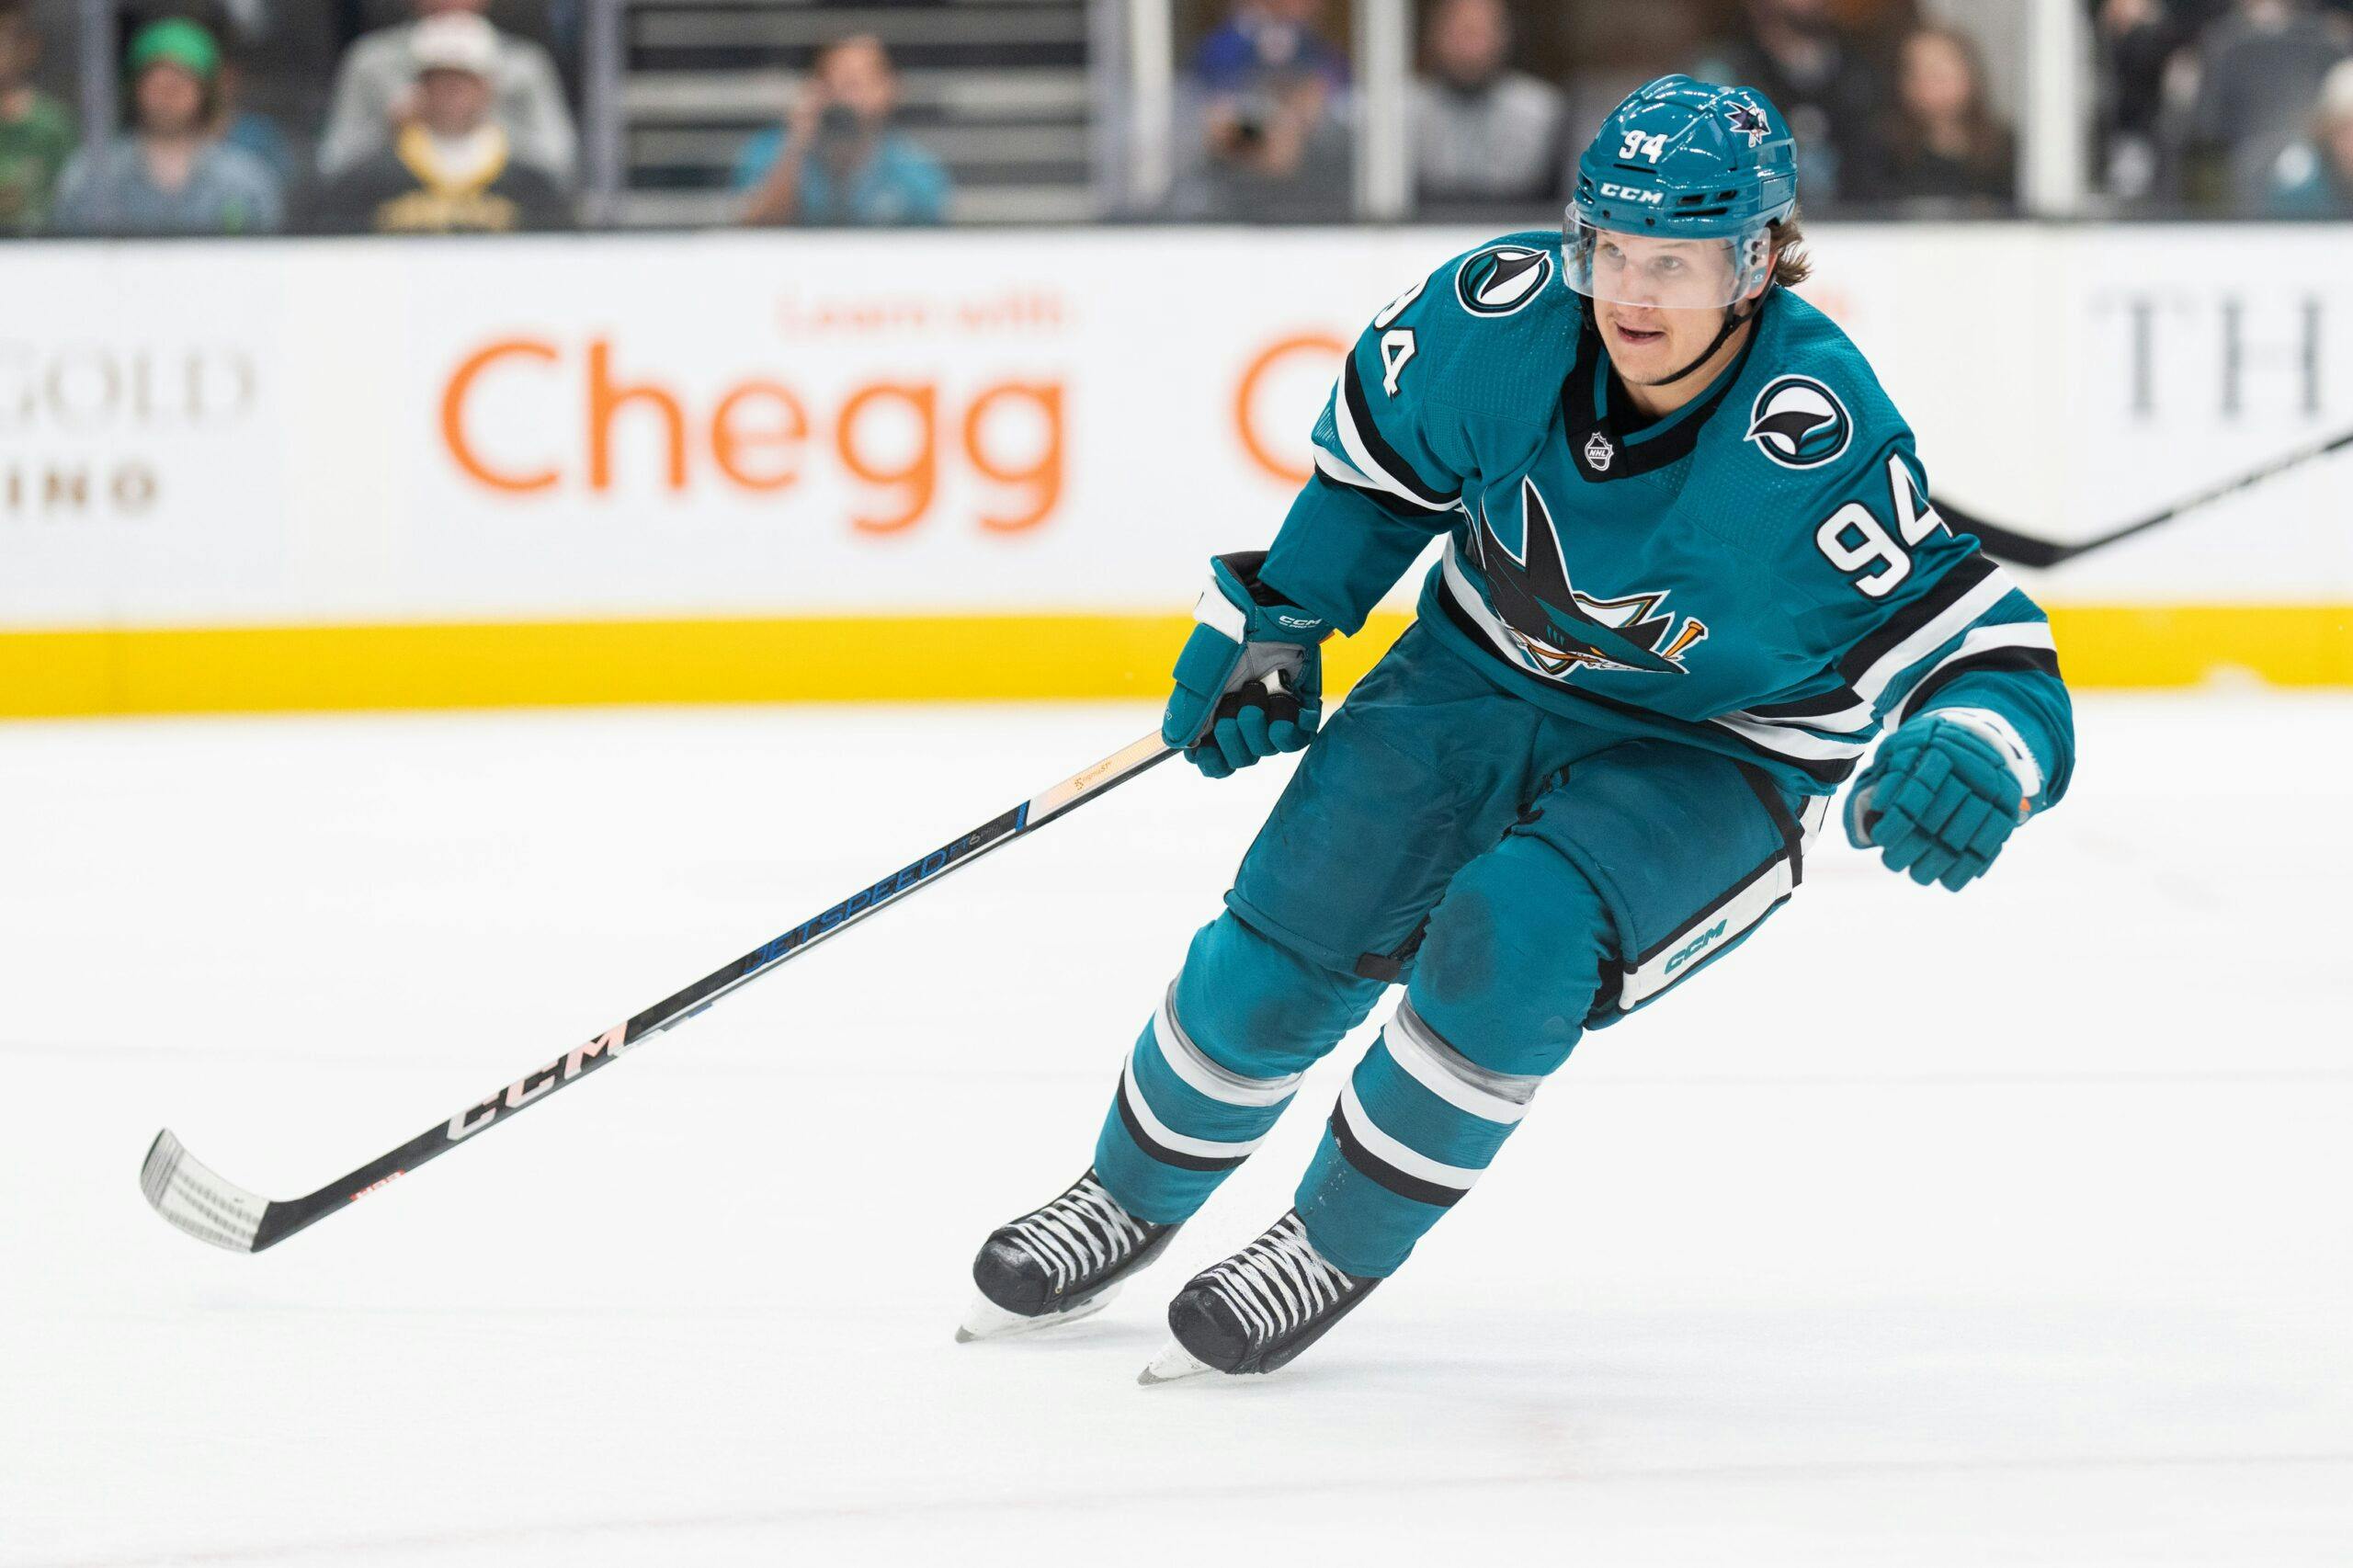 San Jose Sharks’ Alexander Barabanov out for “a while” with upper-body injury